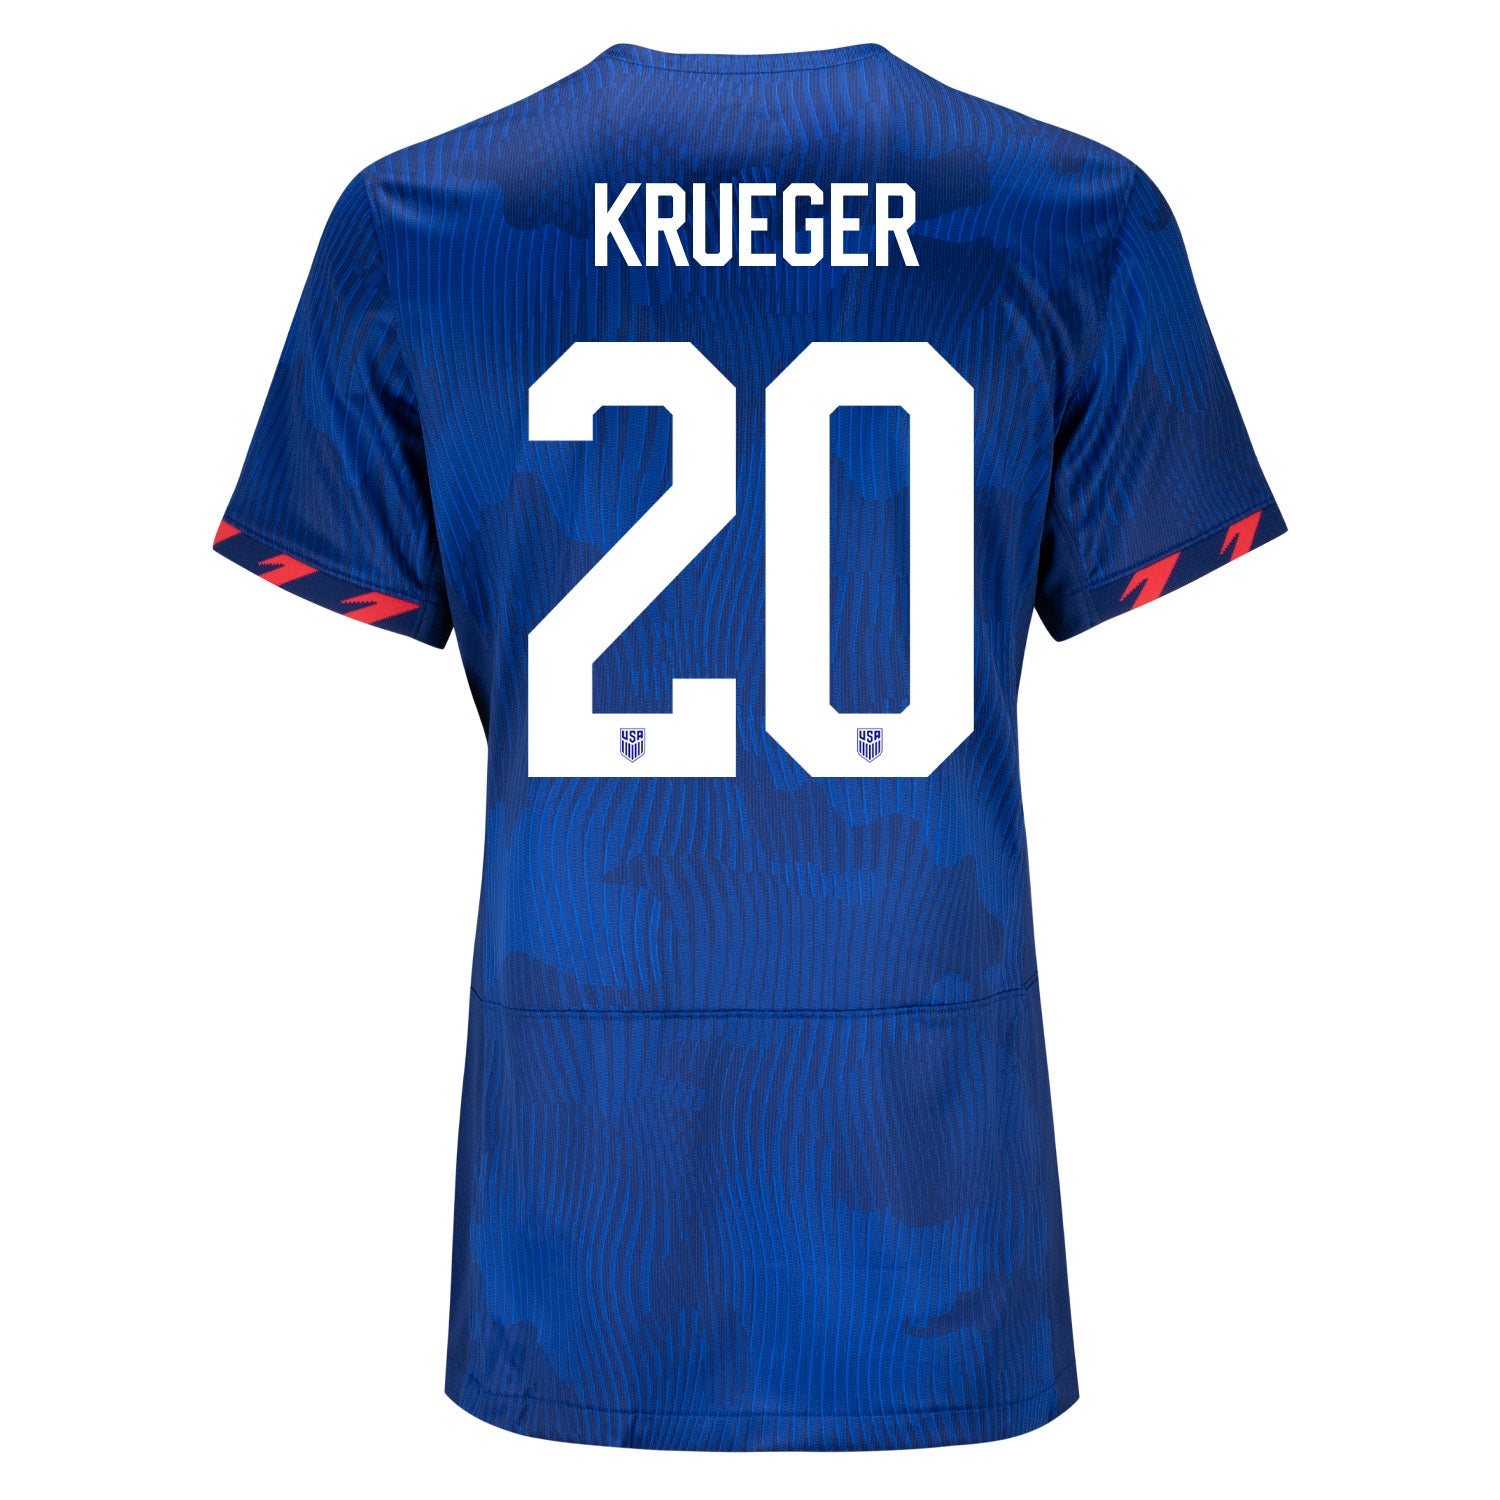 Women's Nike USWNT 2023 Away Personalized Match Jersey in Blue - Back View